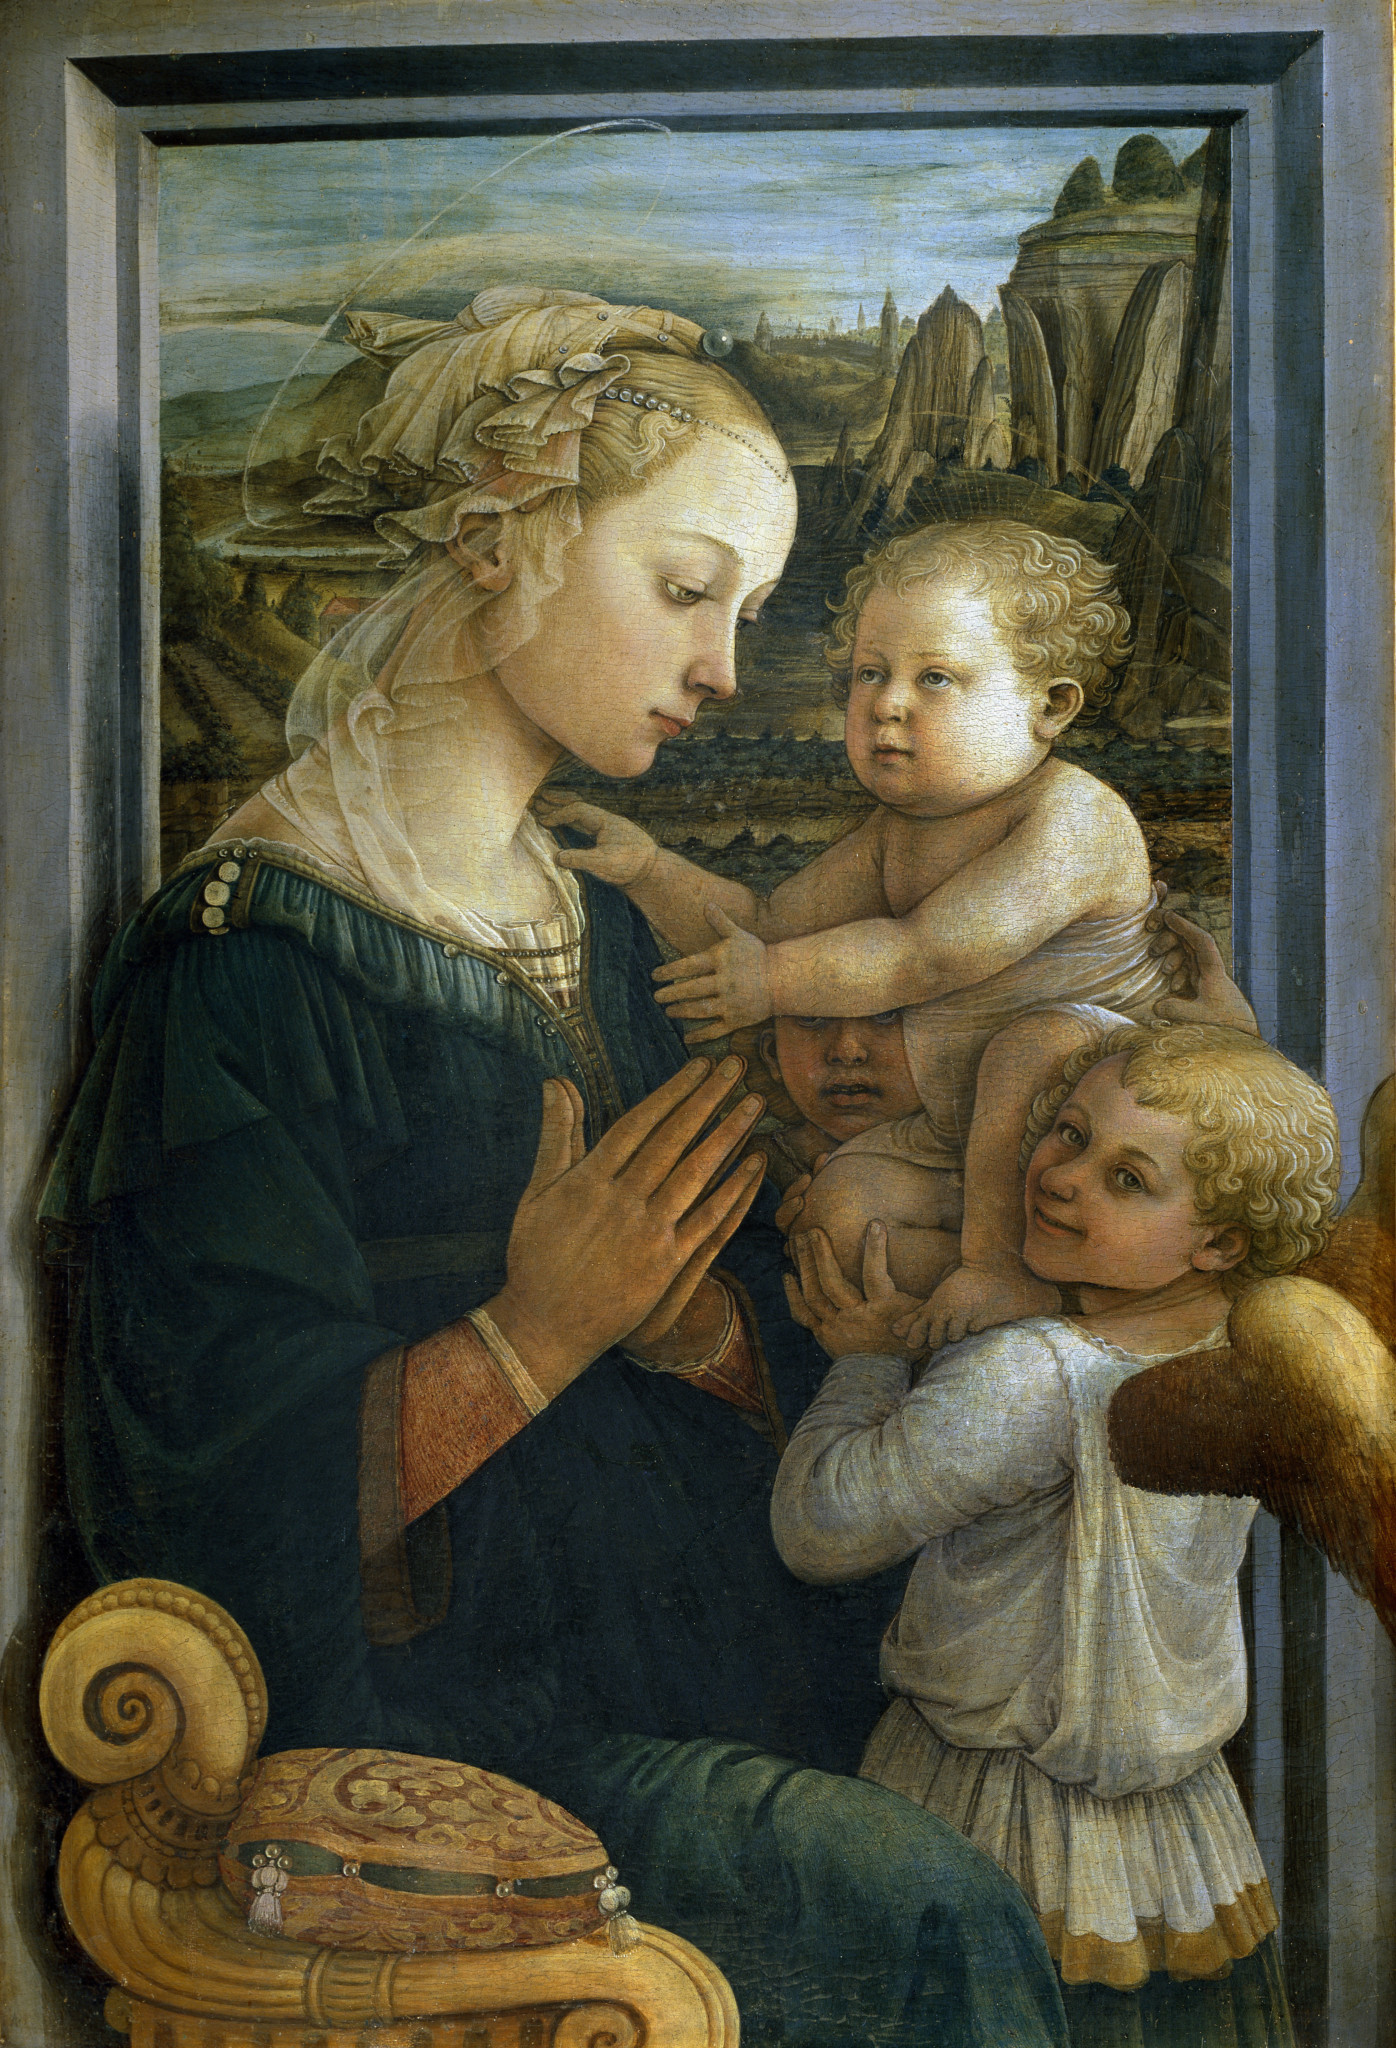 Madonna with the Child and two Angels, Filippo Lippi, 1406–1469, Uffizi Gallery, Florence, Italy. Luisa Ricciarini | Leemage